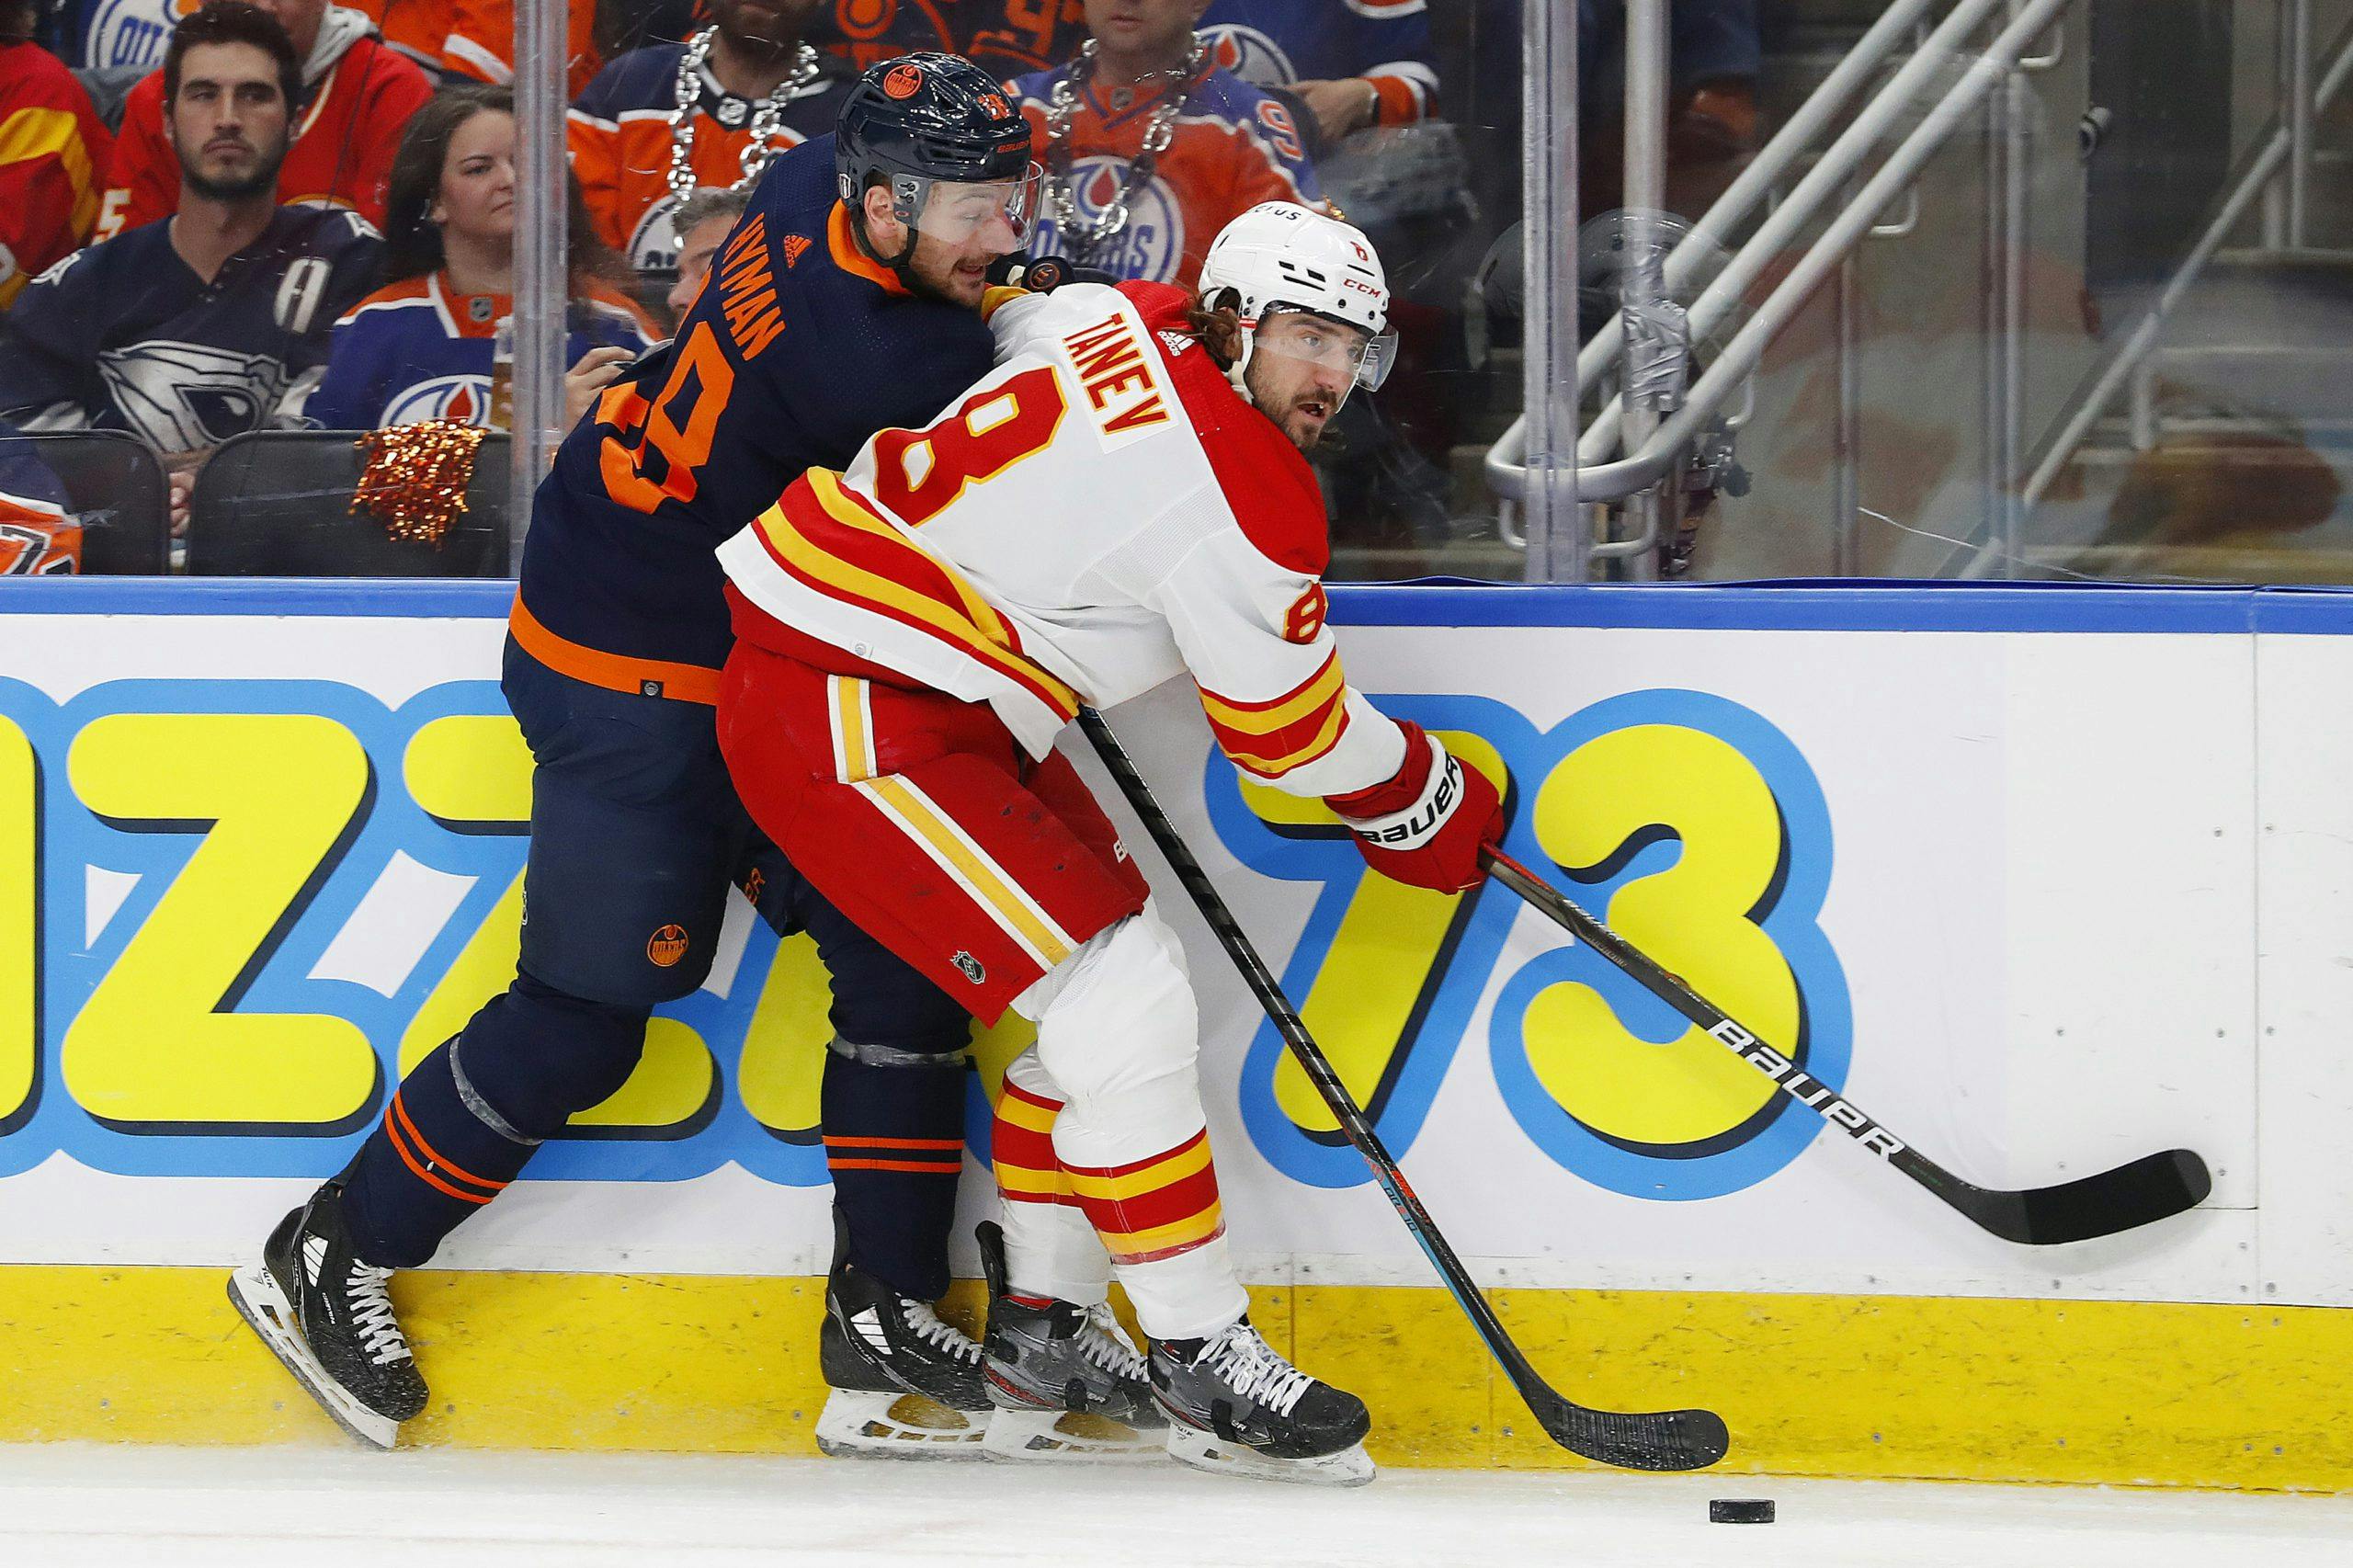 Flames Tanev leaves game after taking shot to head - The San Diego  Union-Tribune